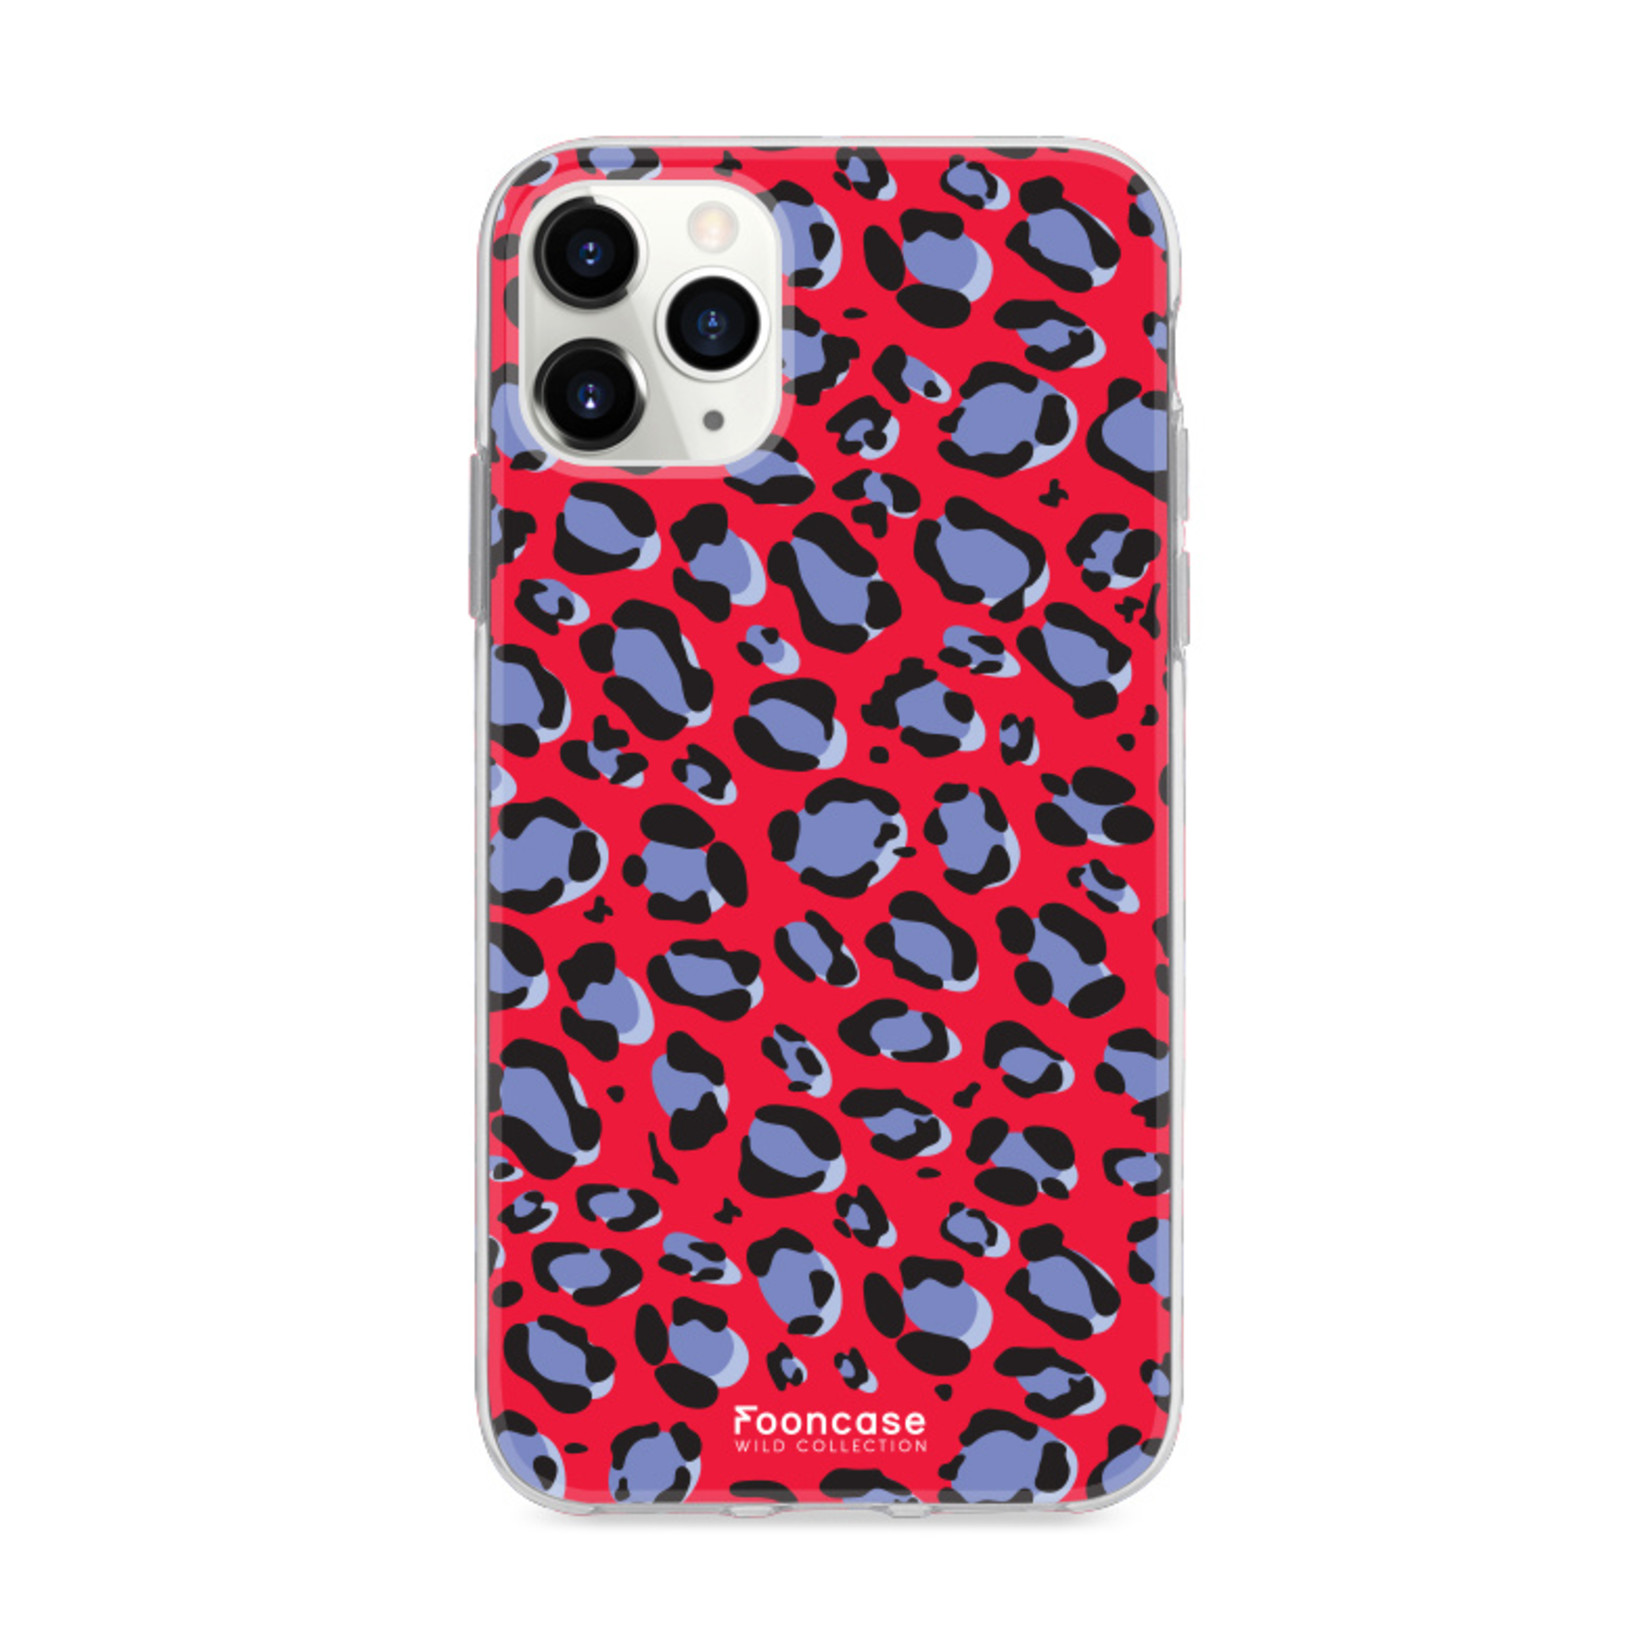 FOONCASE IPhone 11 Pro - WILD COLLECTION / Red